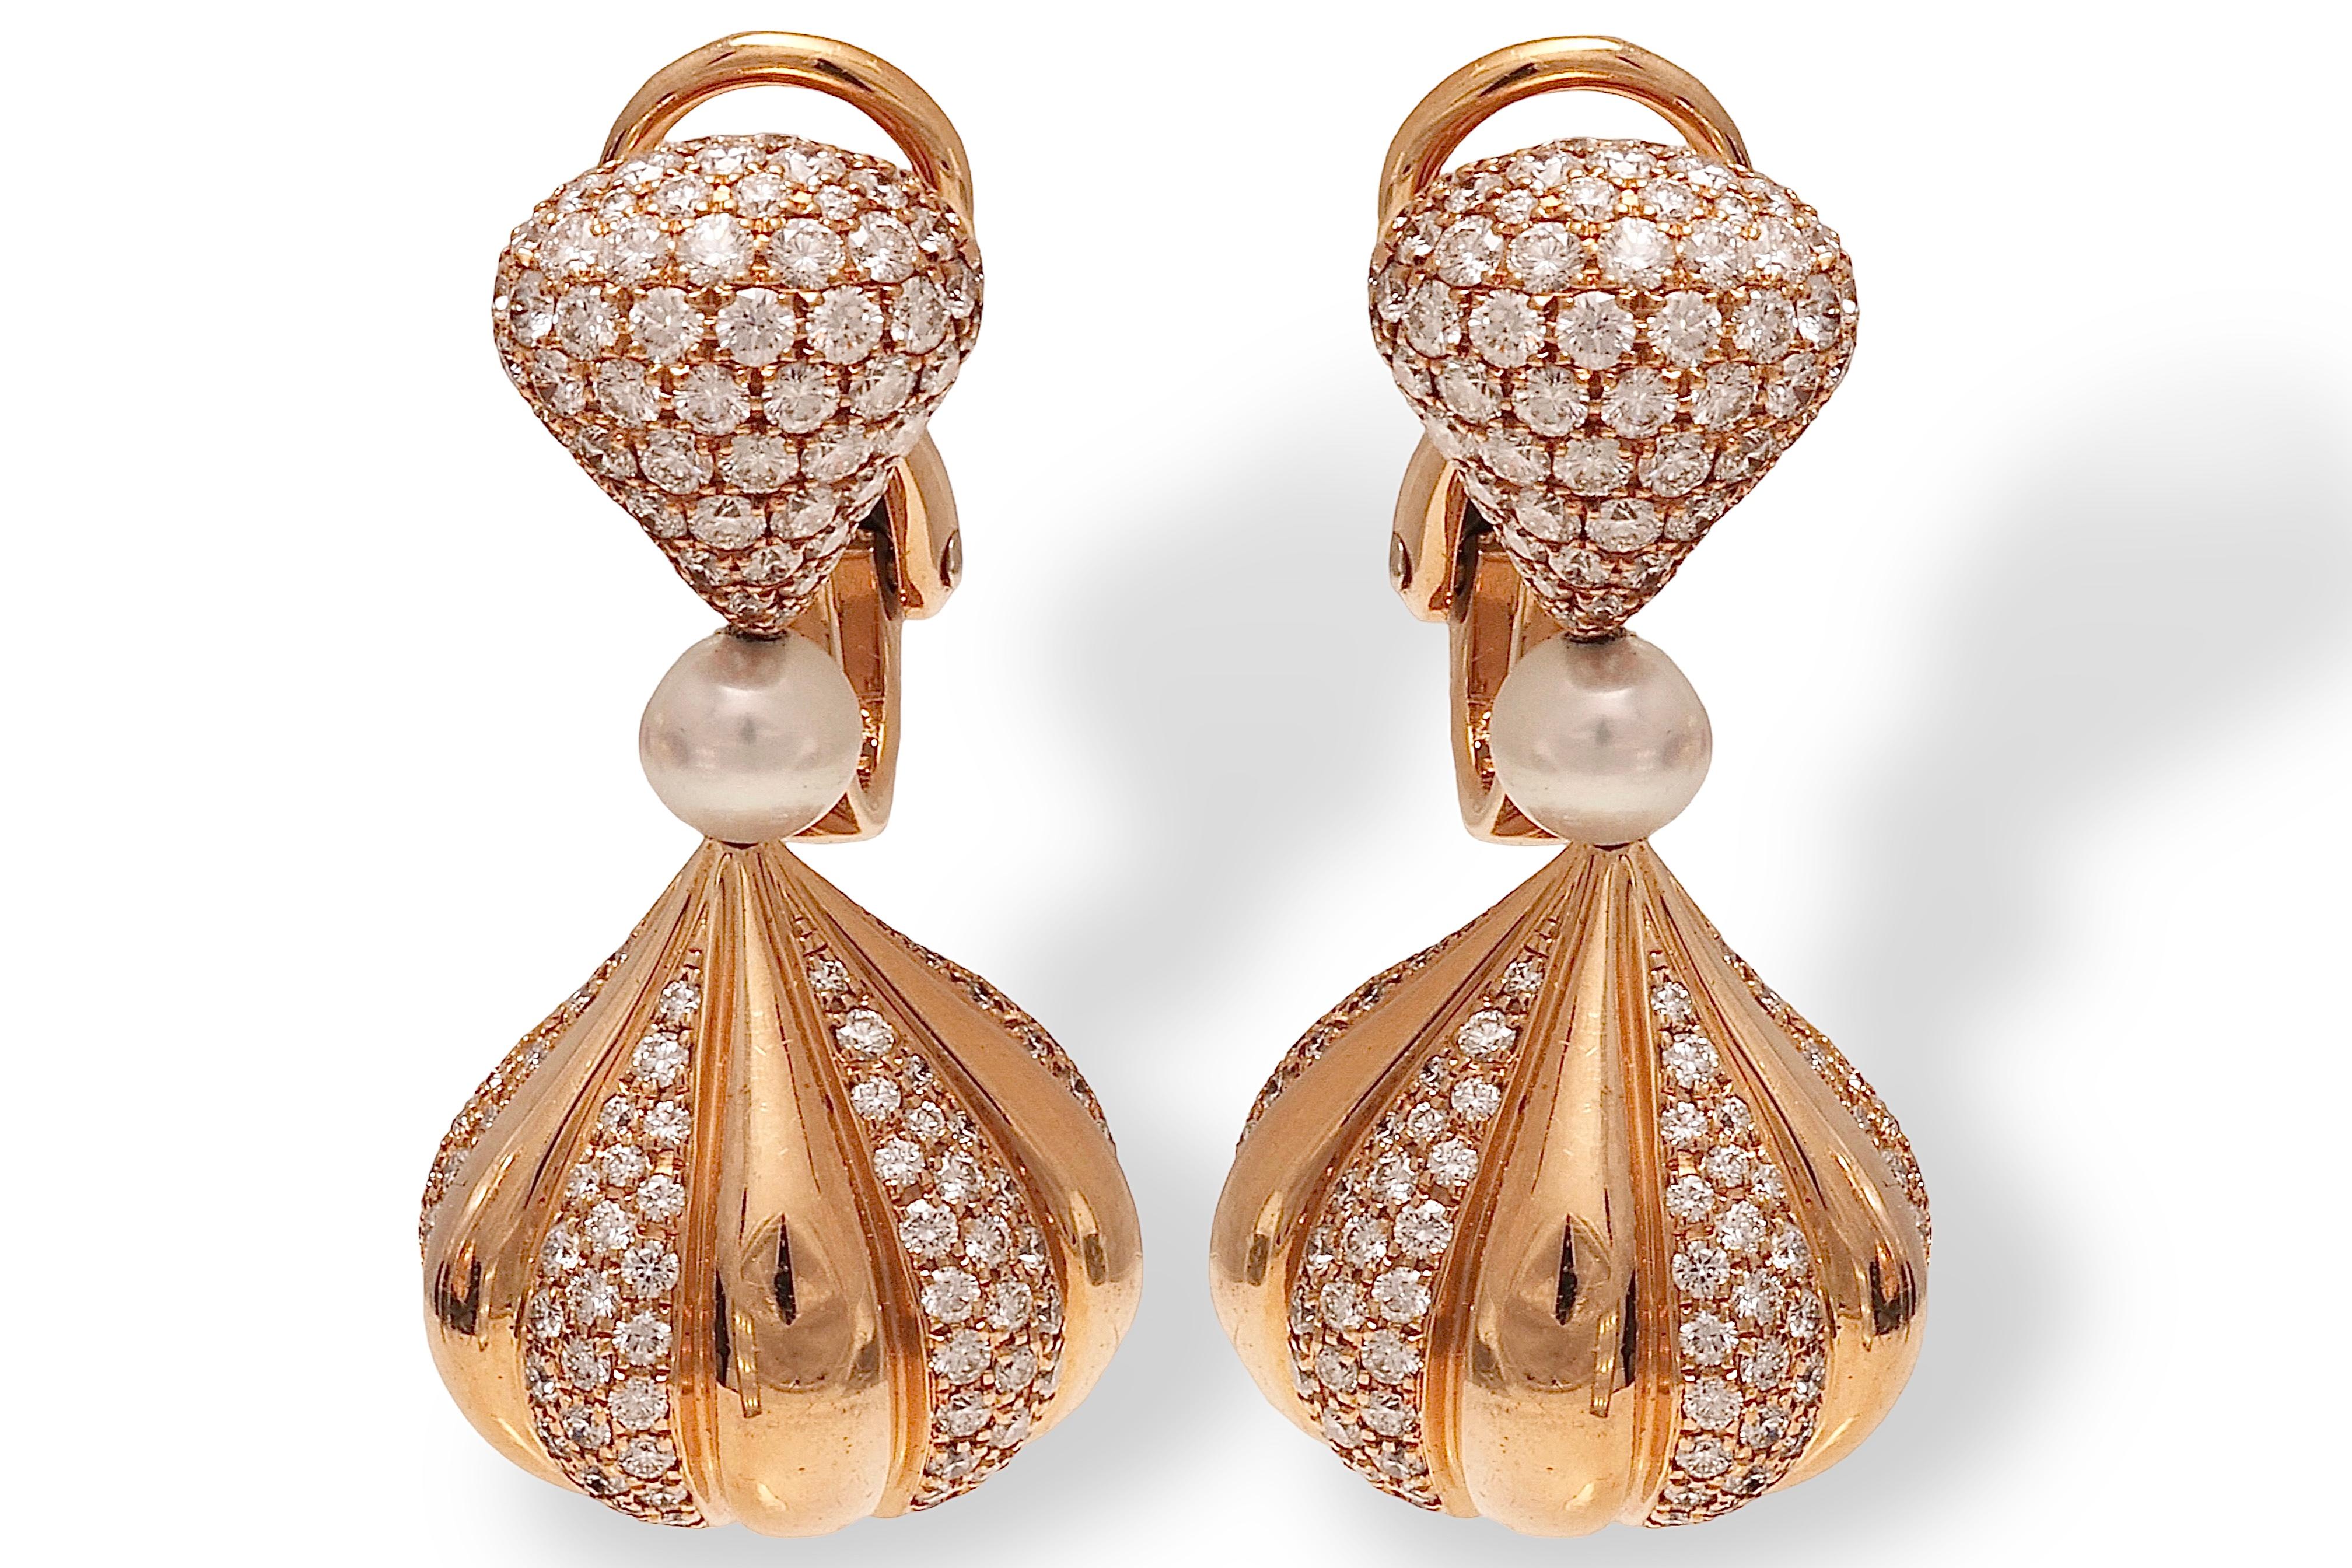 Gorgeous Chopard Earrings 18 kt. Yellow gold With Diamonds

Diamonds: Brilliant cut diamonds together approx. 4.9 ct.  

Pearl: 2 pearls with diameter of 4.8 mm

Material: 18 kt. Yellow Gold

Measurements: 33.2 mm x 15.8 mm x 15.8 mm

Total weight: